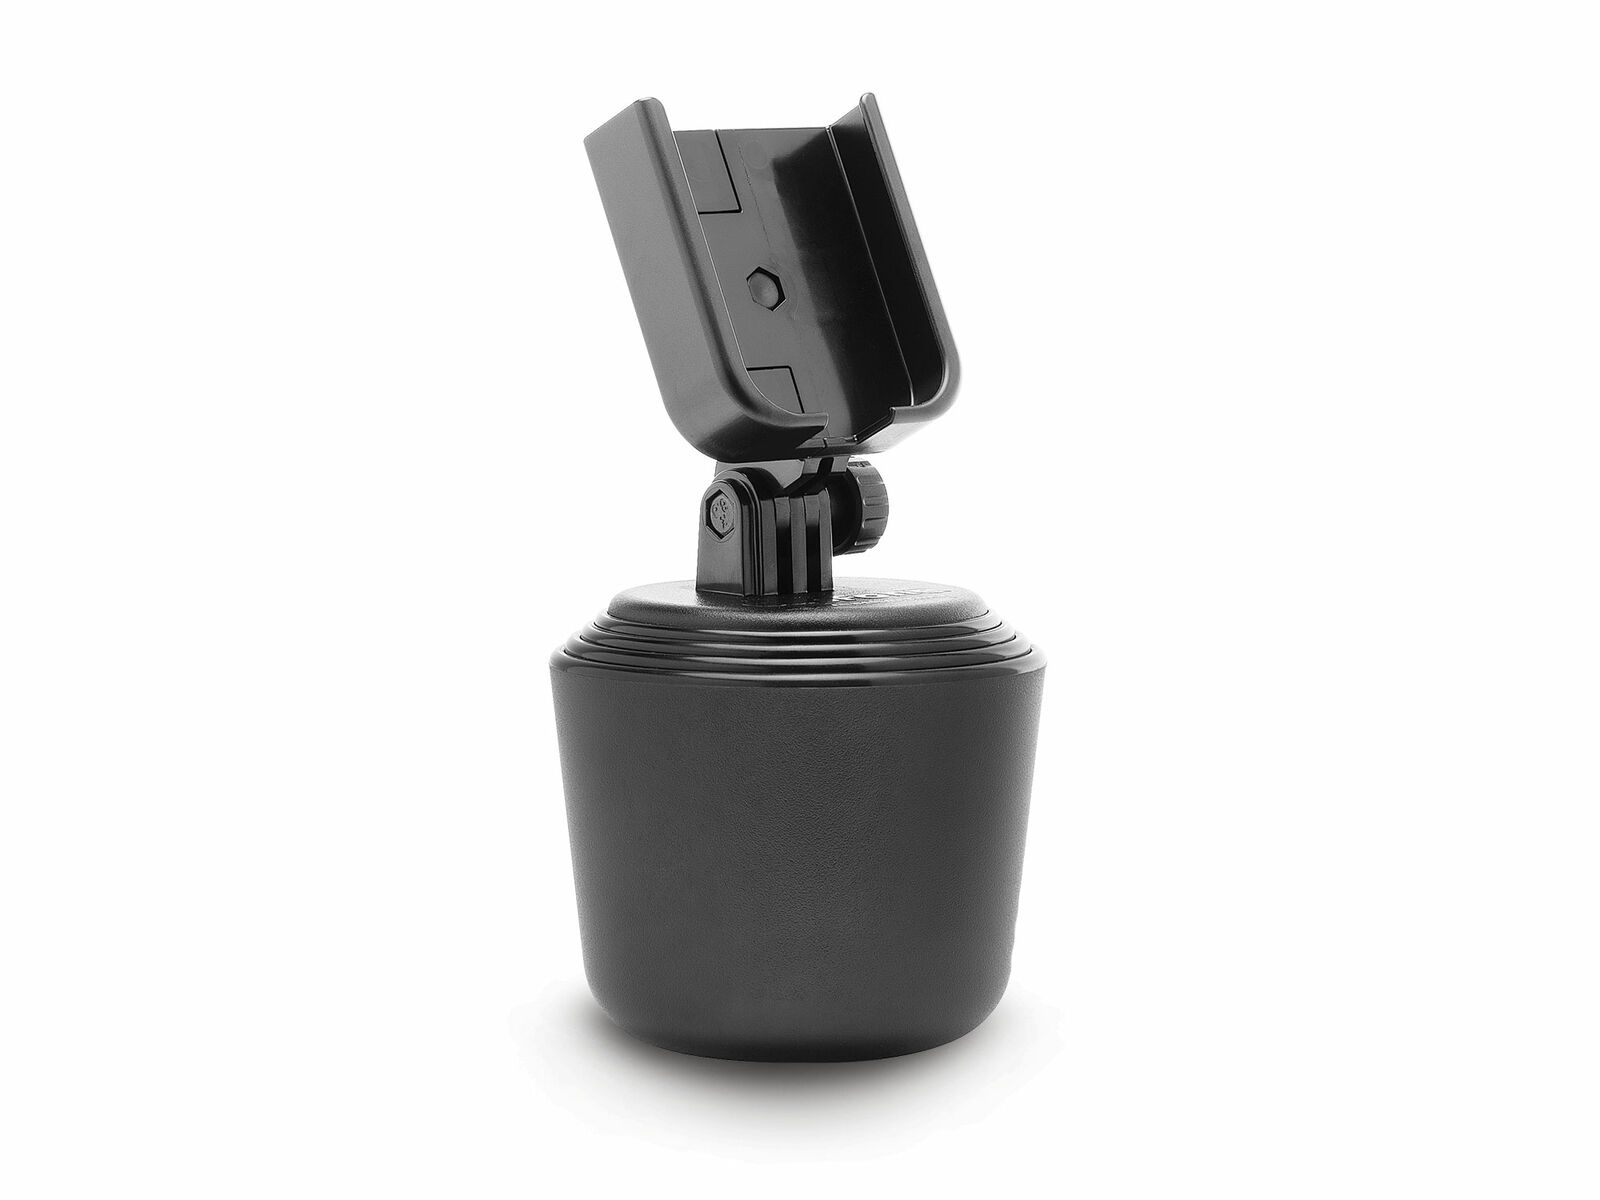 WeatherTech CupFone Universal Adjustable Cup Holder Car Mount for Cell Phones